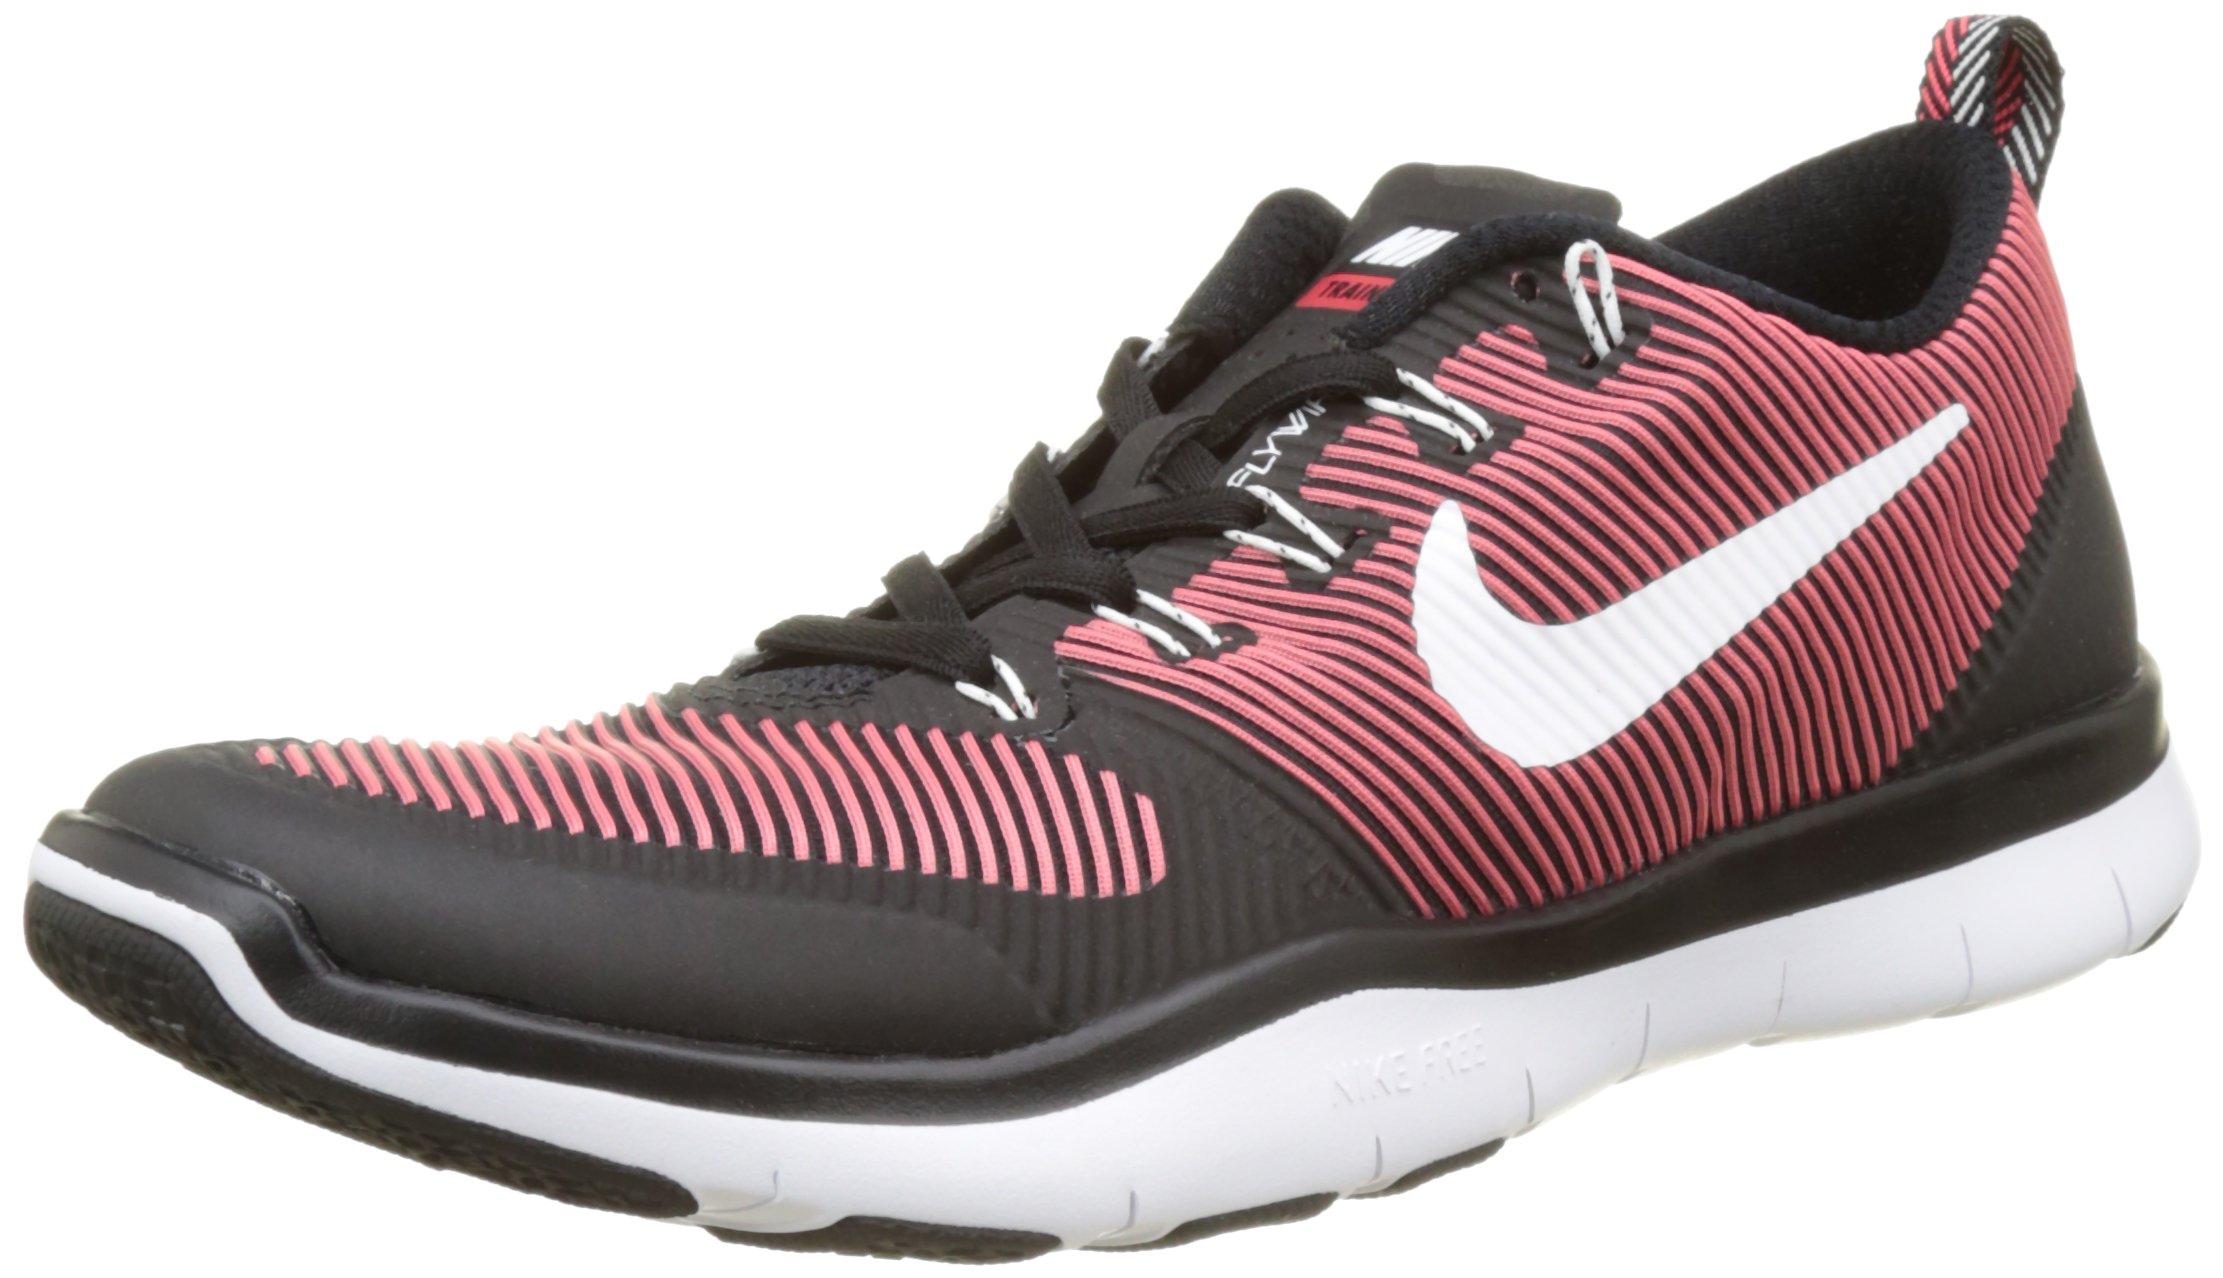 Nike Free Train Versatility Fitness Shoes in Red for Men - Save 48% - Lyst